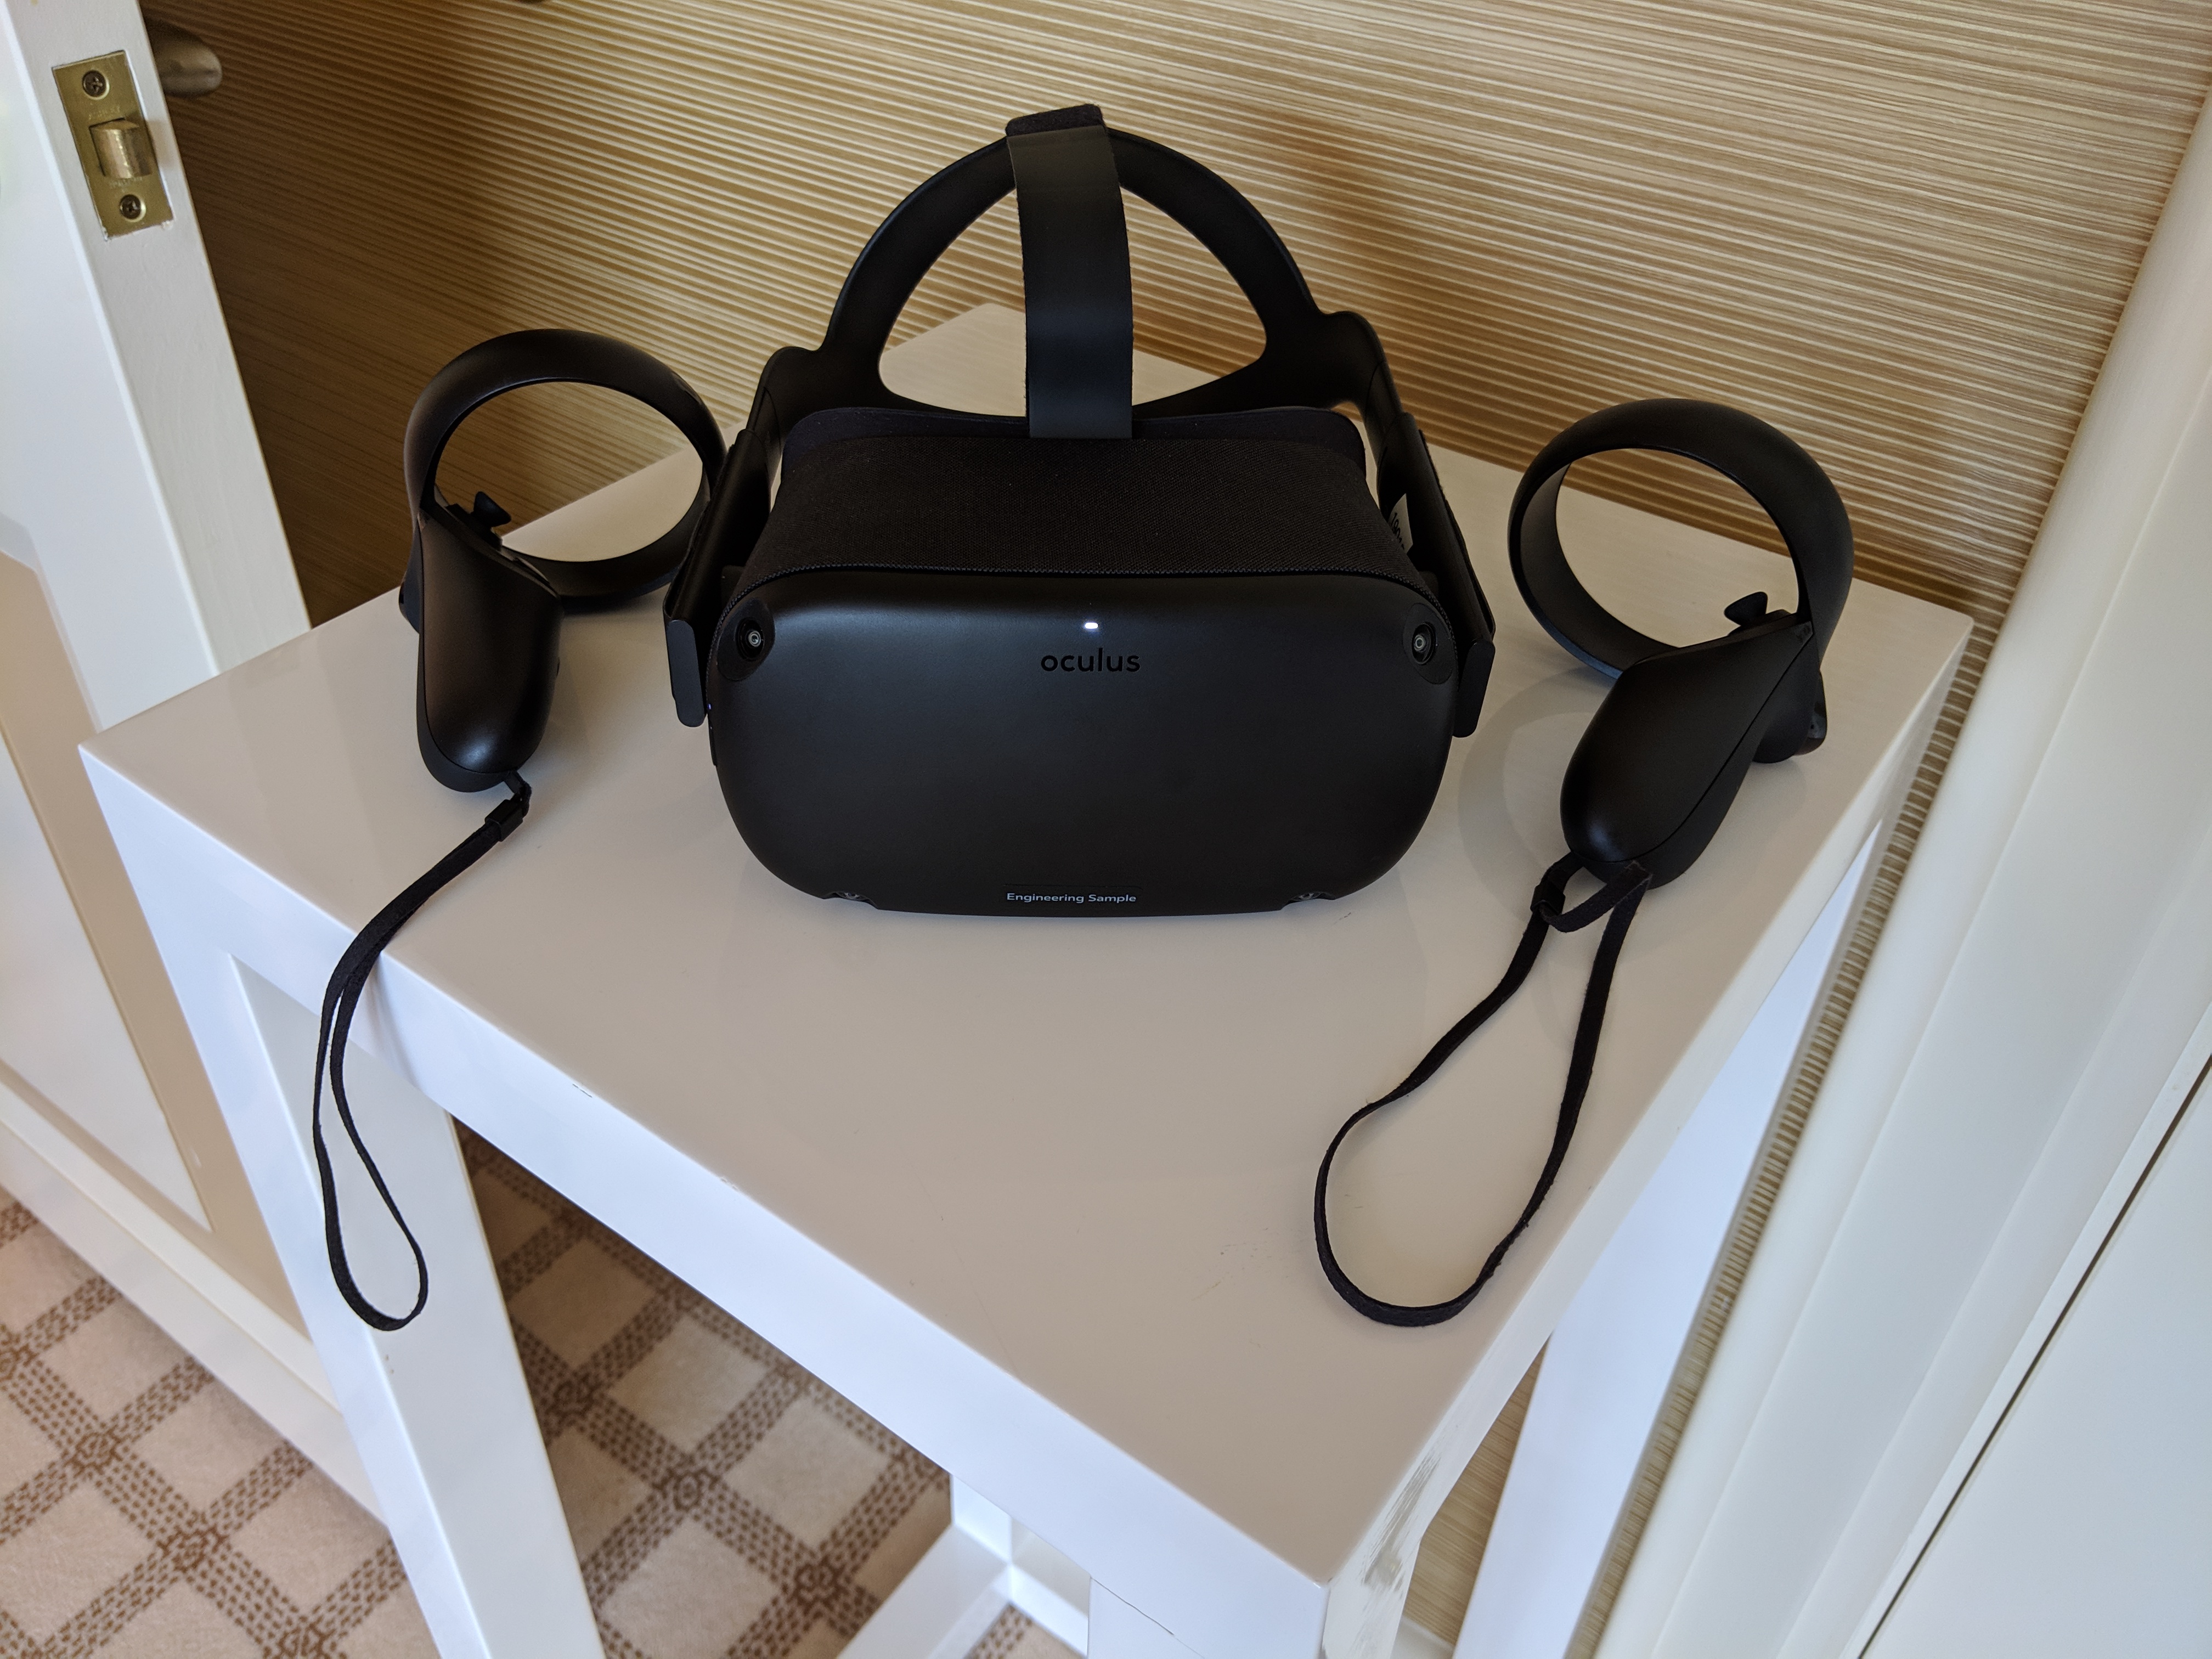 Oculus Quest's secret trick: It can double as a wired PC VR headset